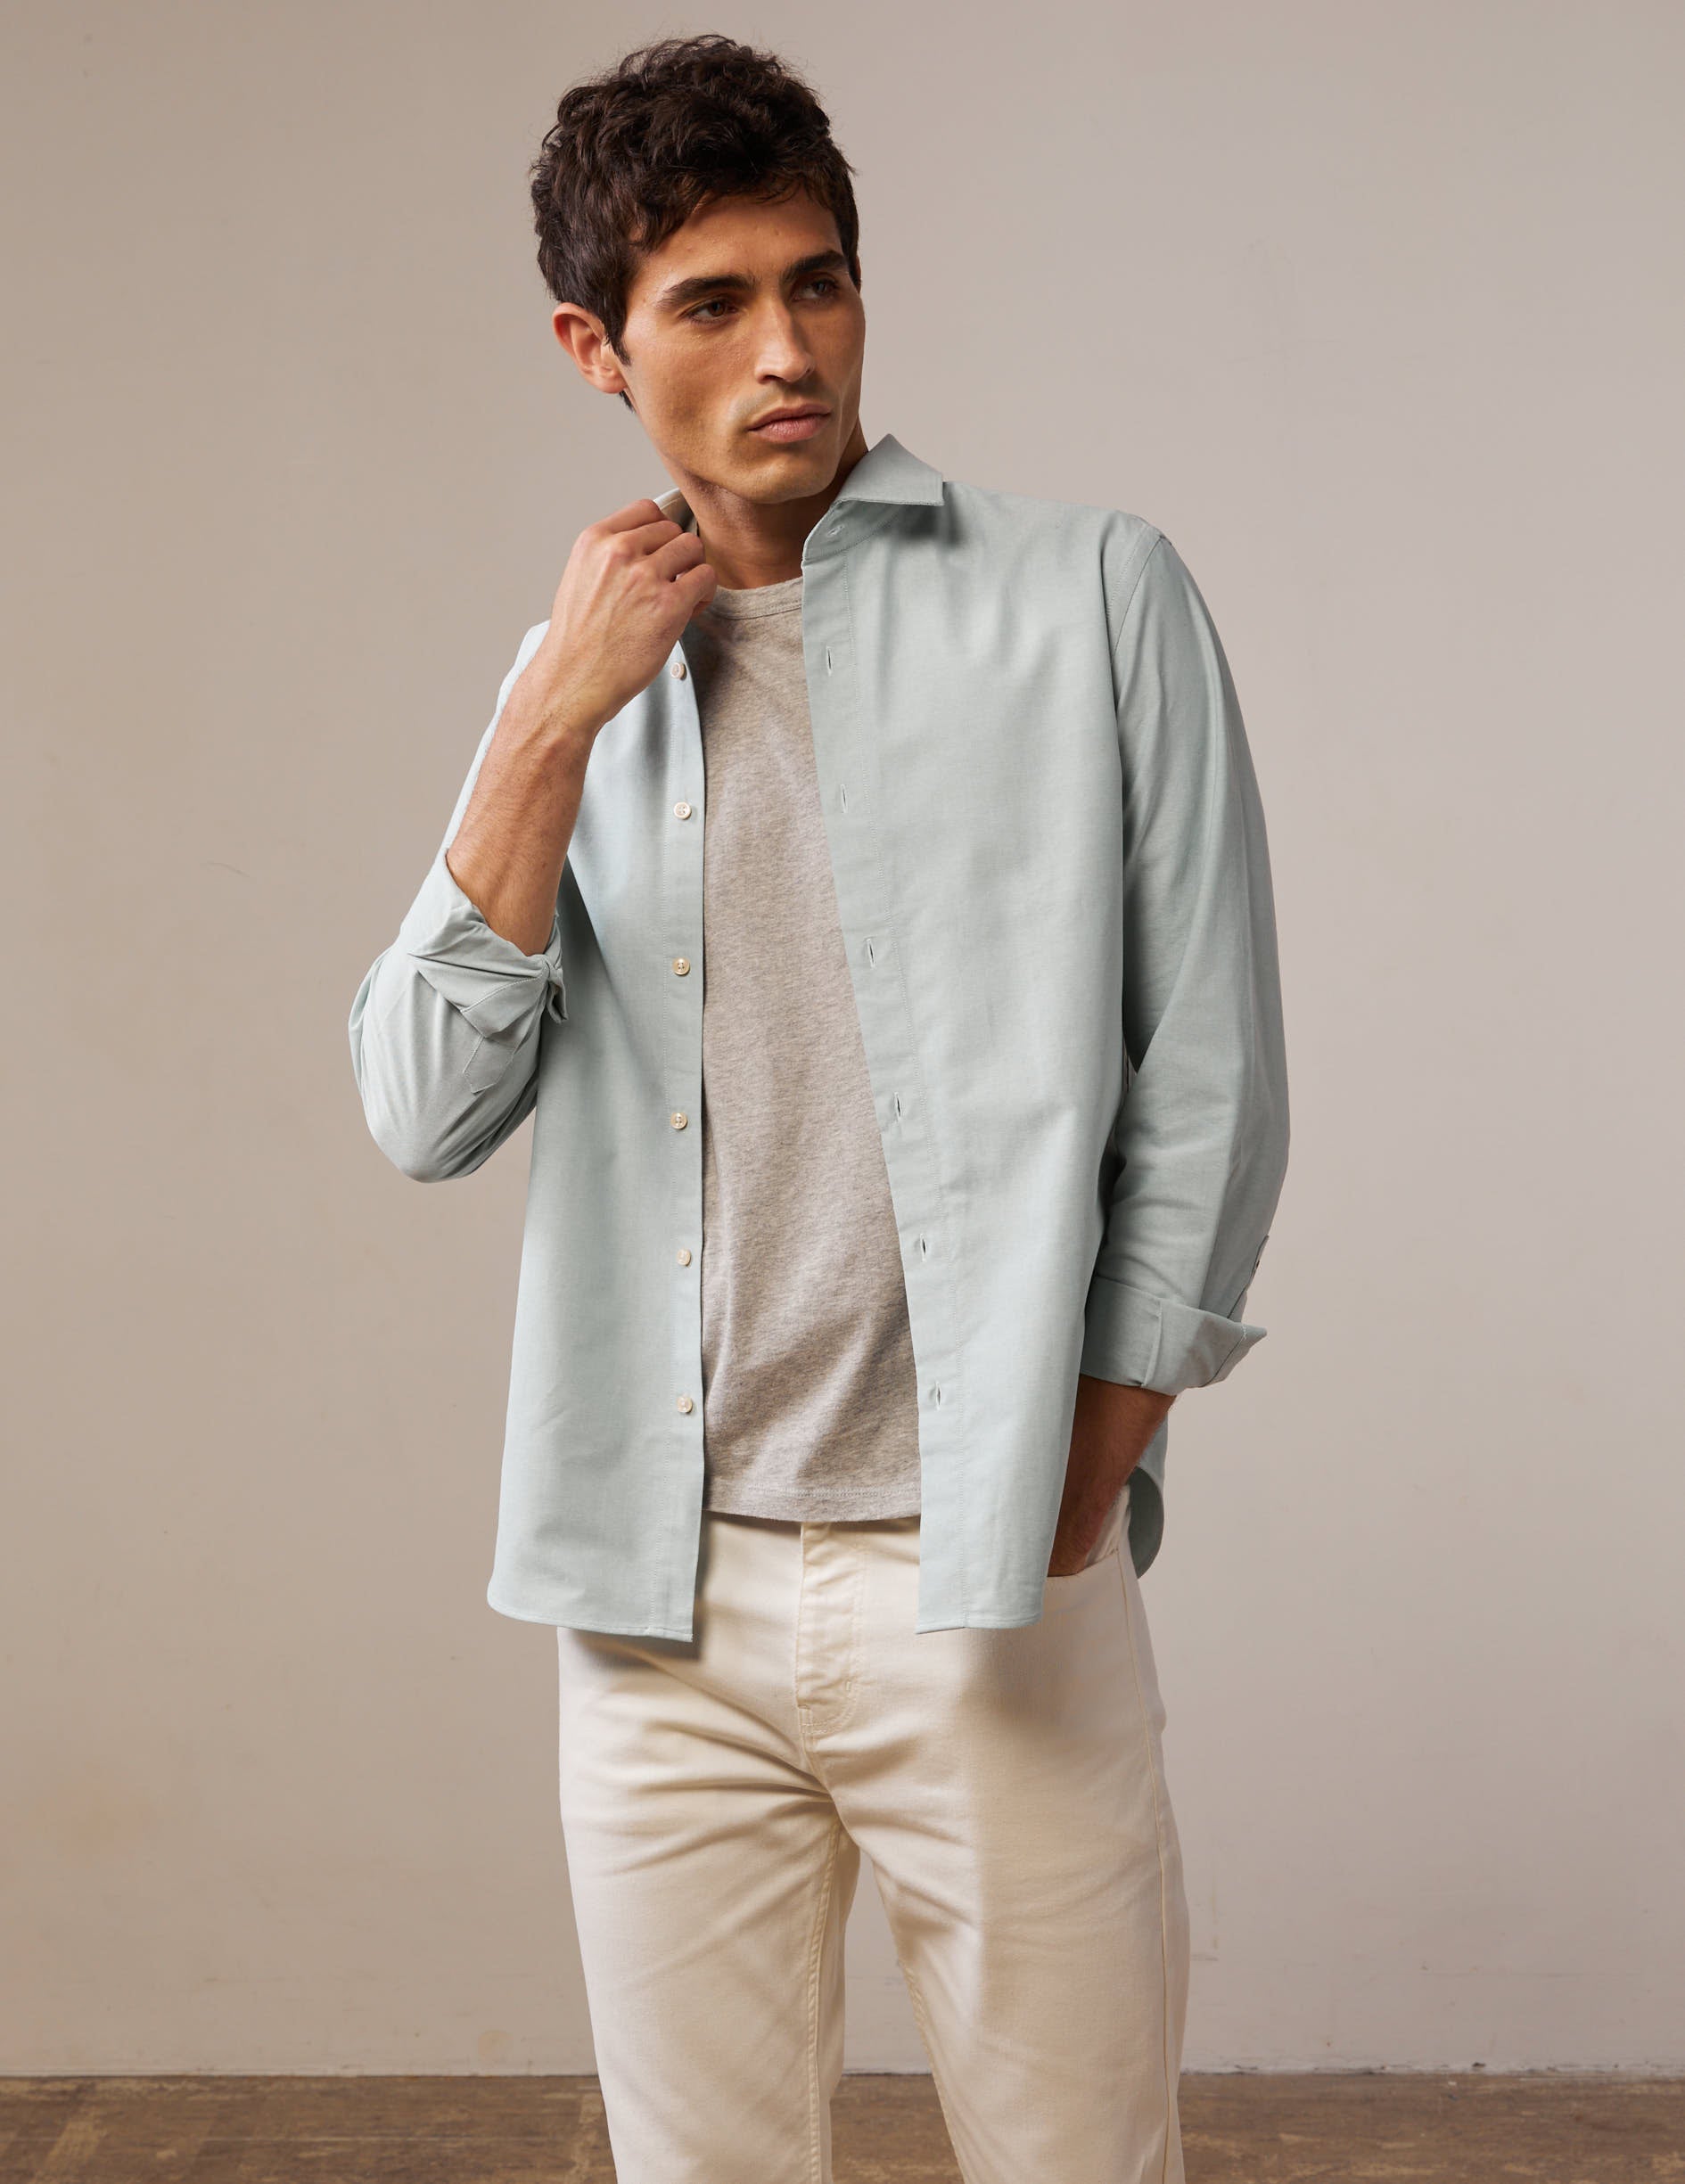 Light green Auguste shirt - Oxford - French Collar